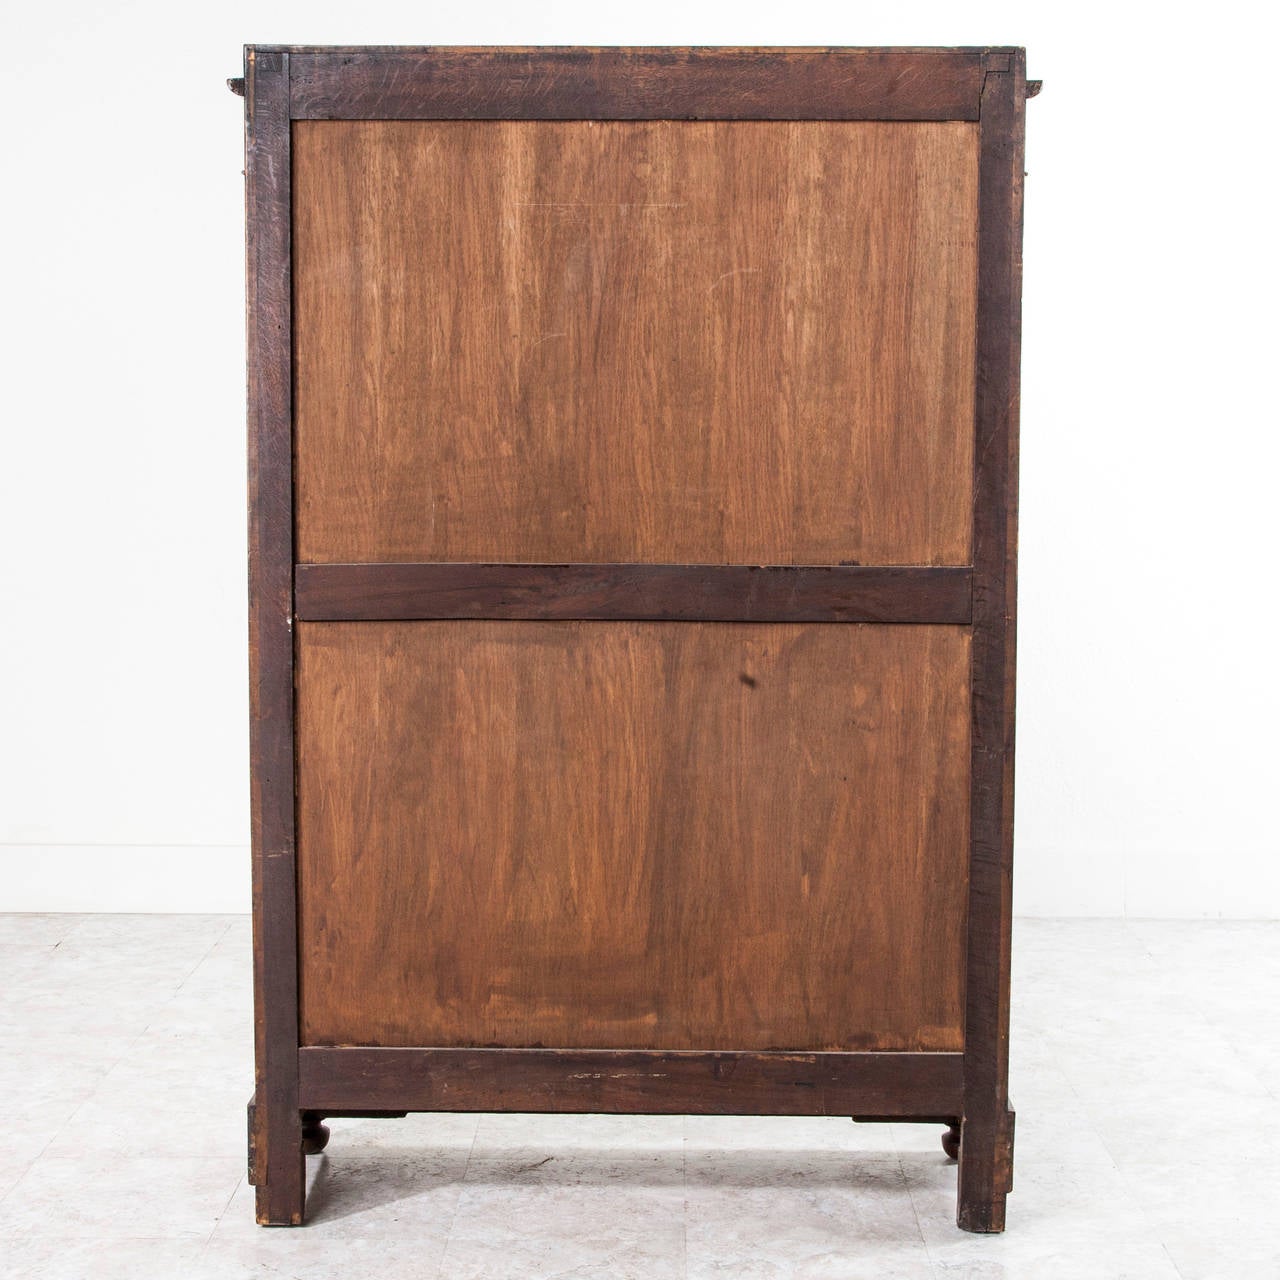 Period Louis Philippe Flamed Mahogany Bookcase or Vitrine Cabinet 2